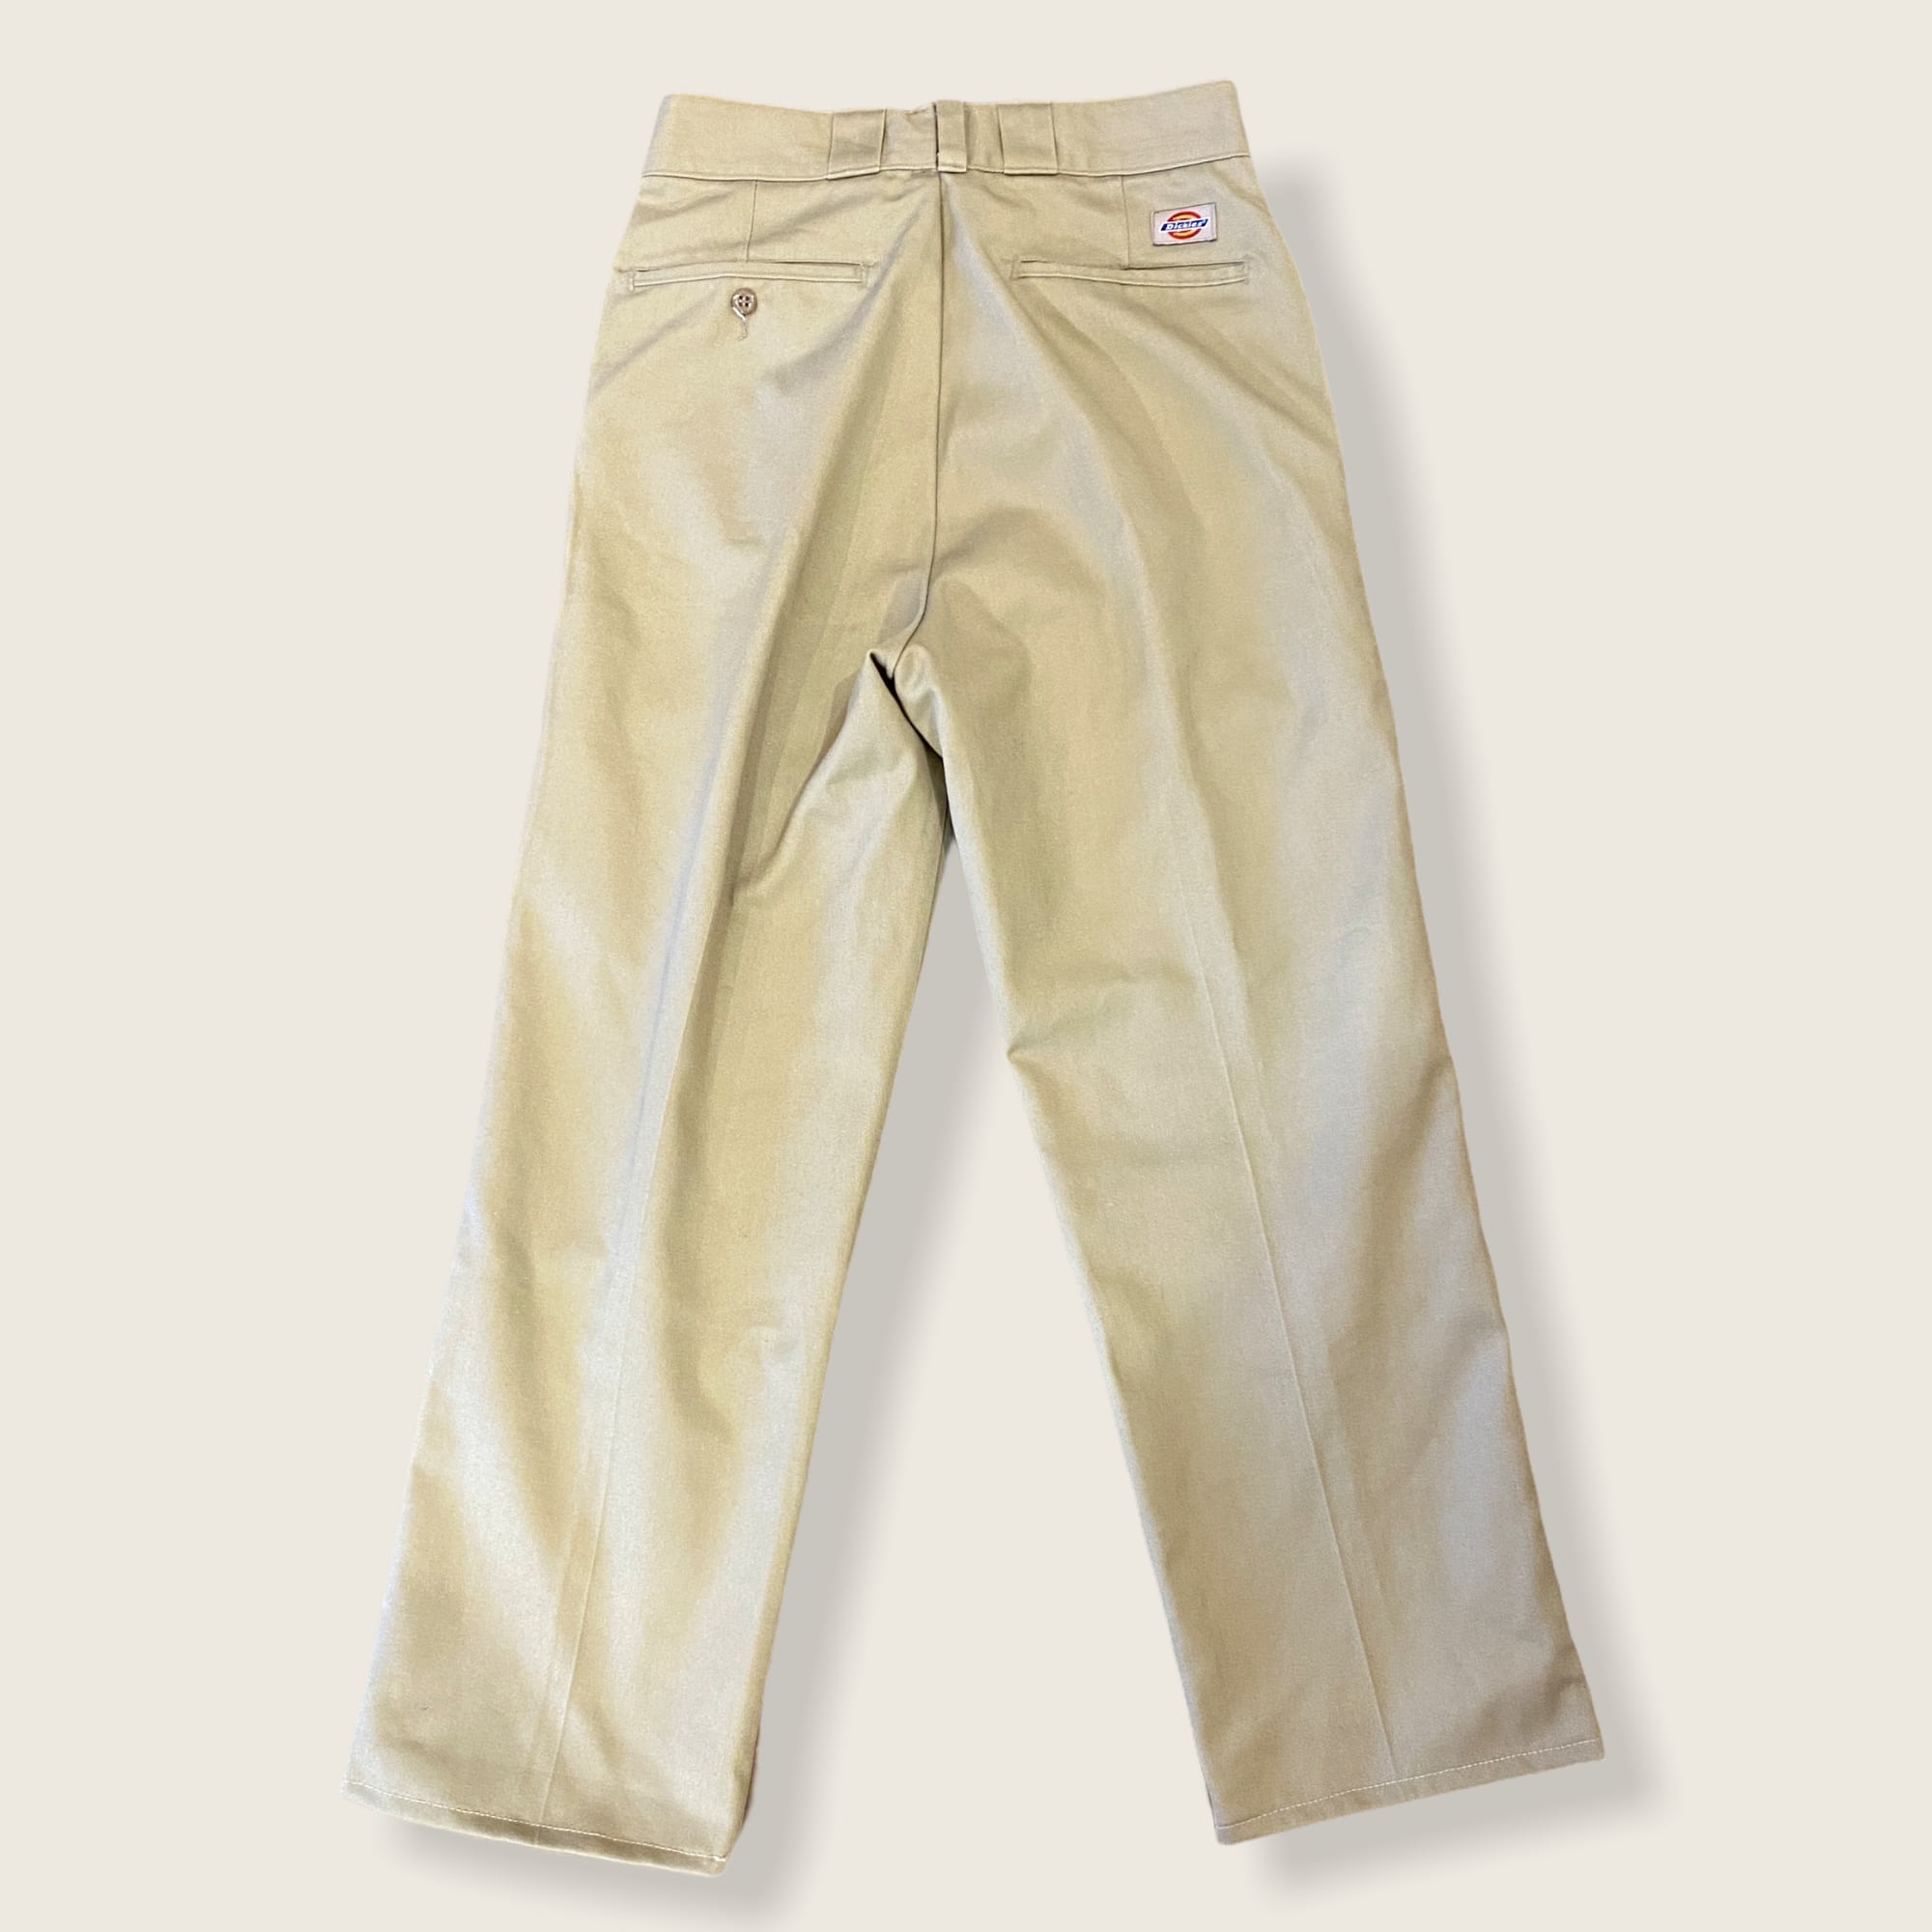 80s dickies コーデュロイパンツ made in USA 874-